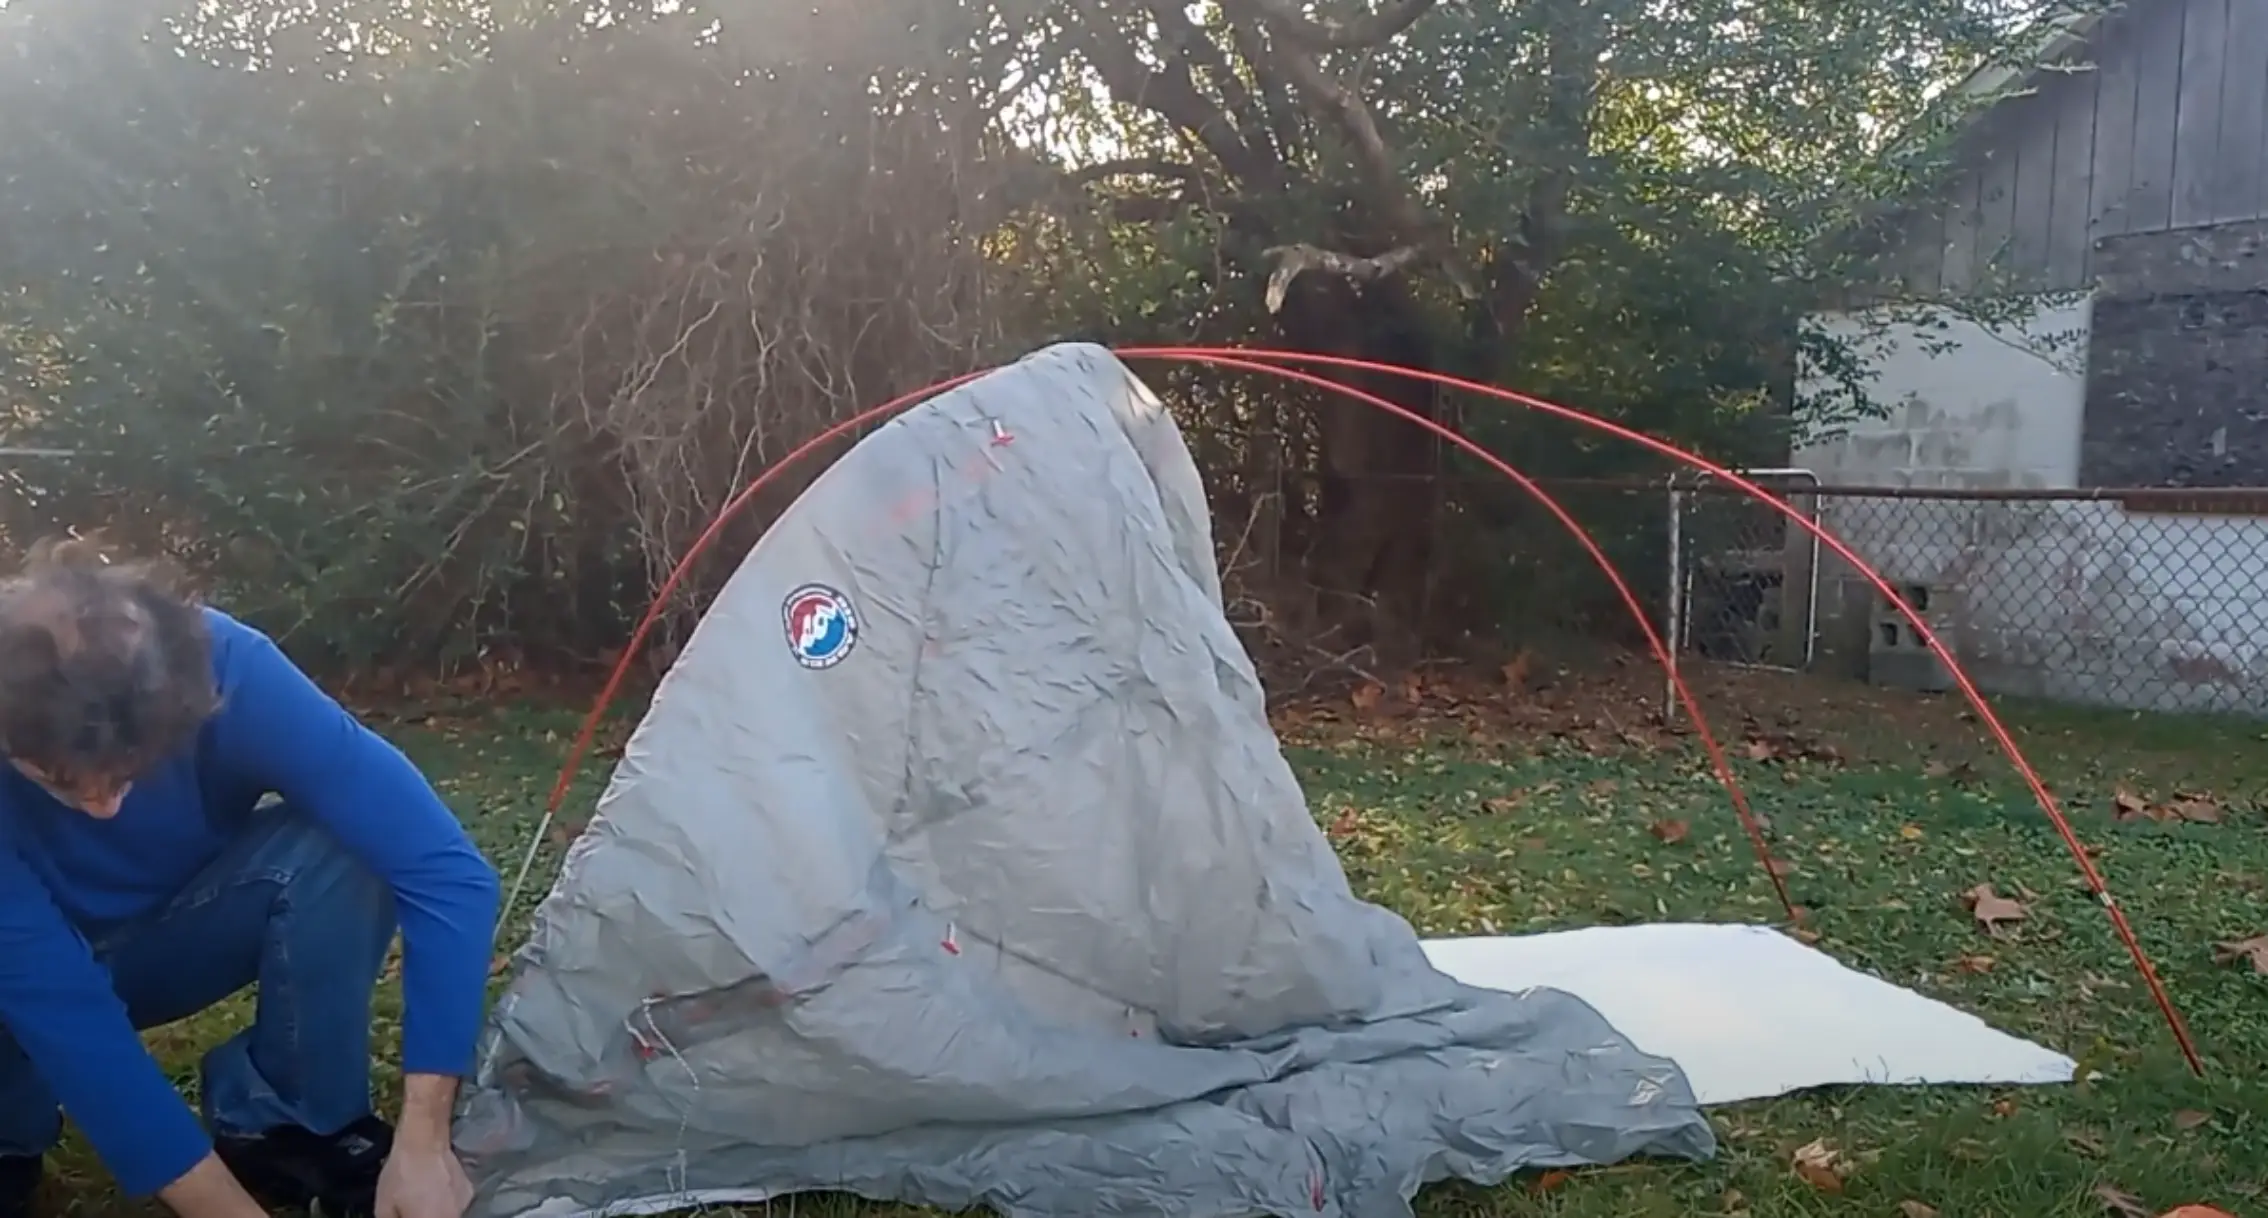 Here are 8 easy ways to put a tarp under a tent